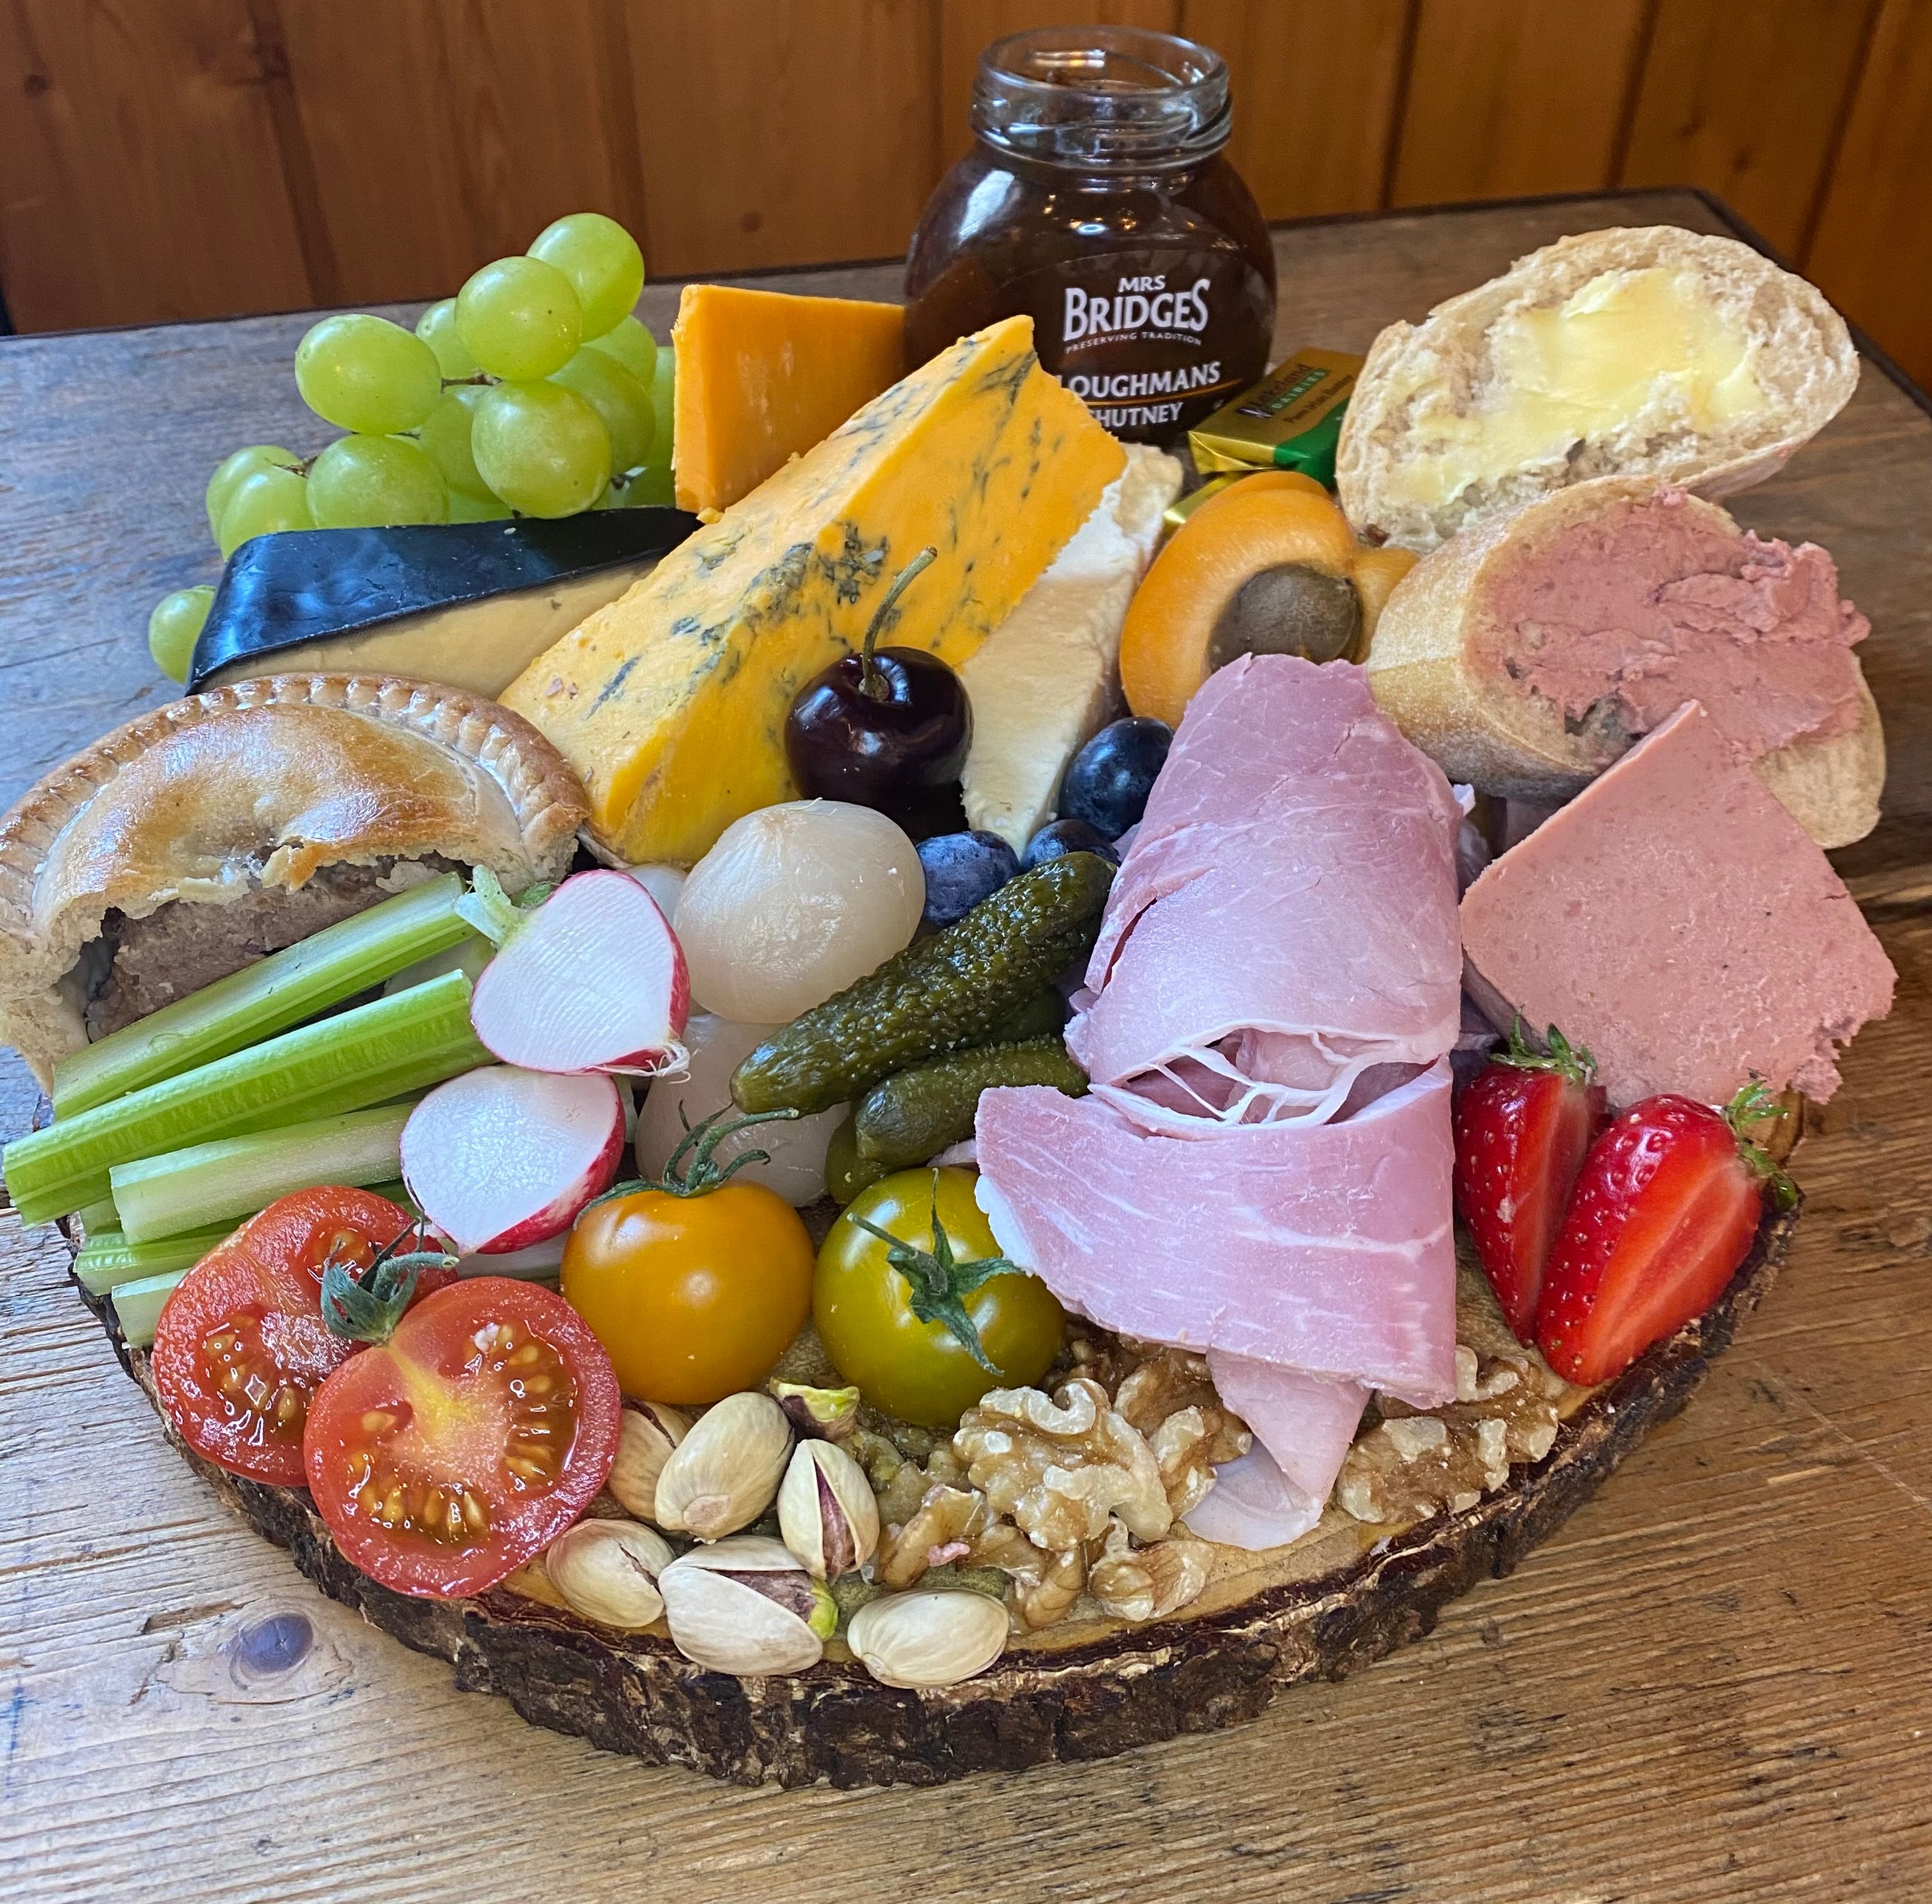 Extra Special Ploughman’s Lunch